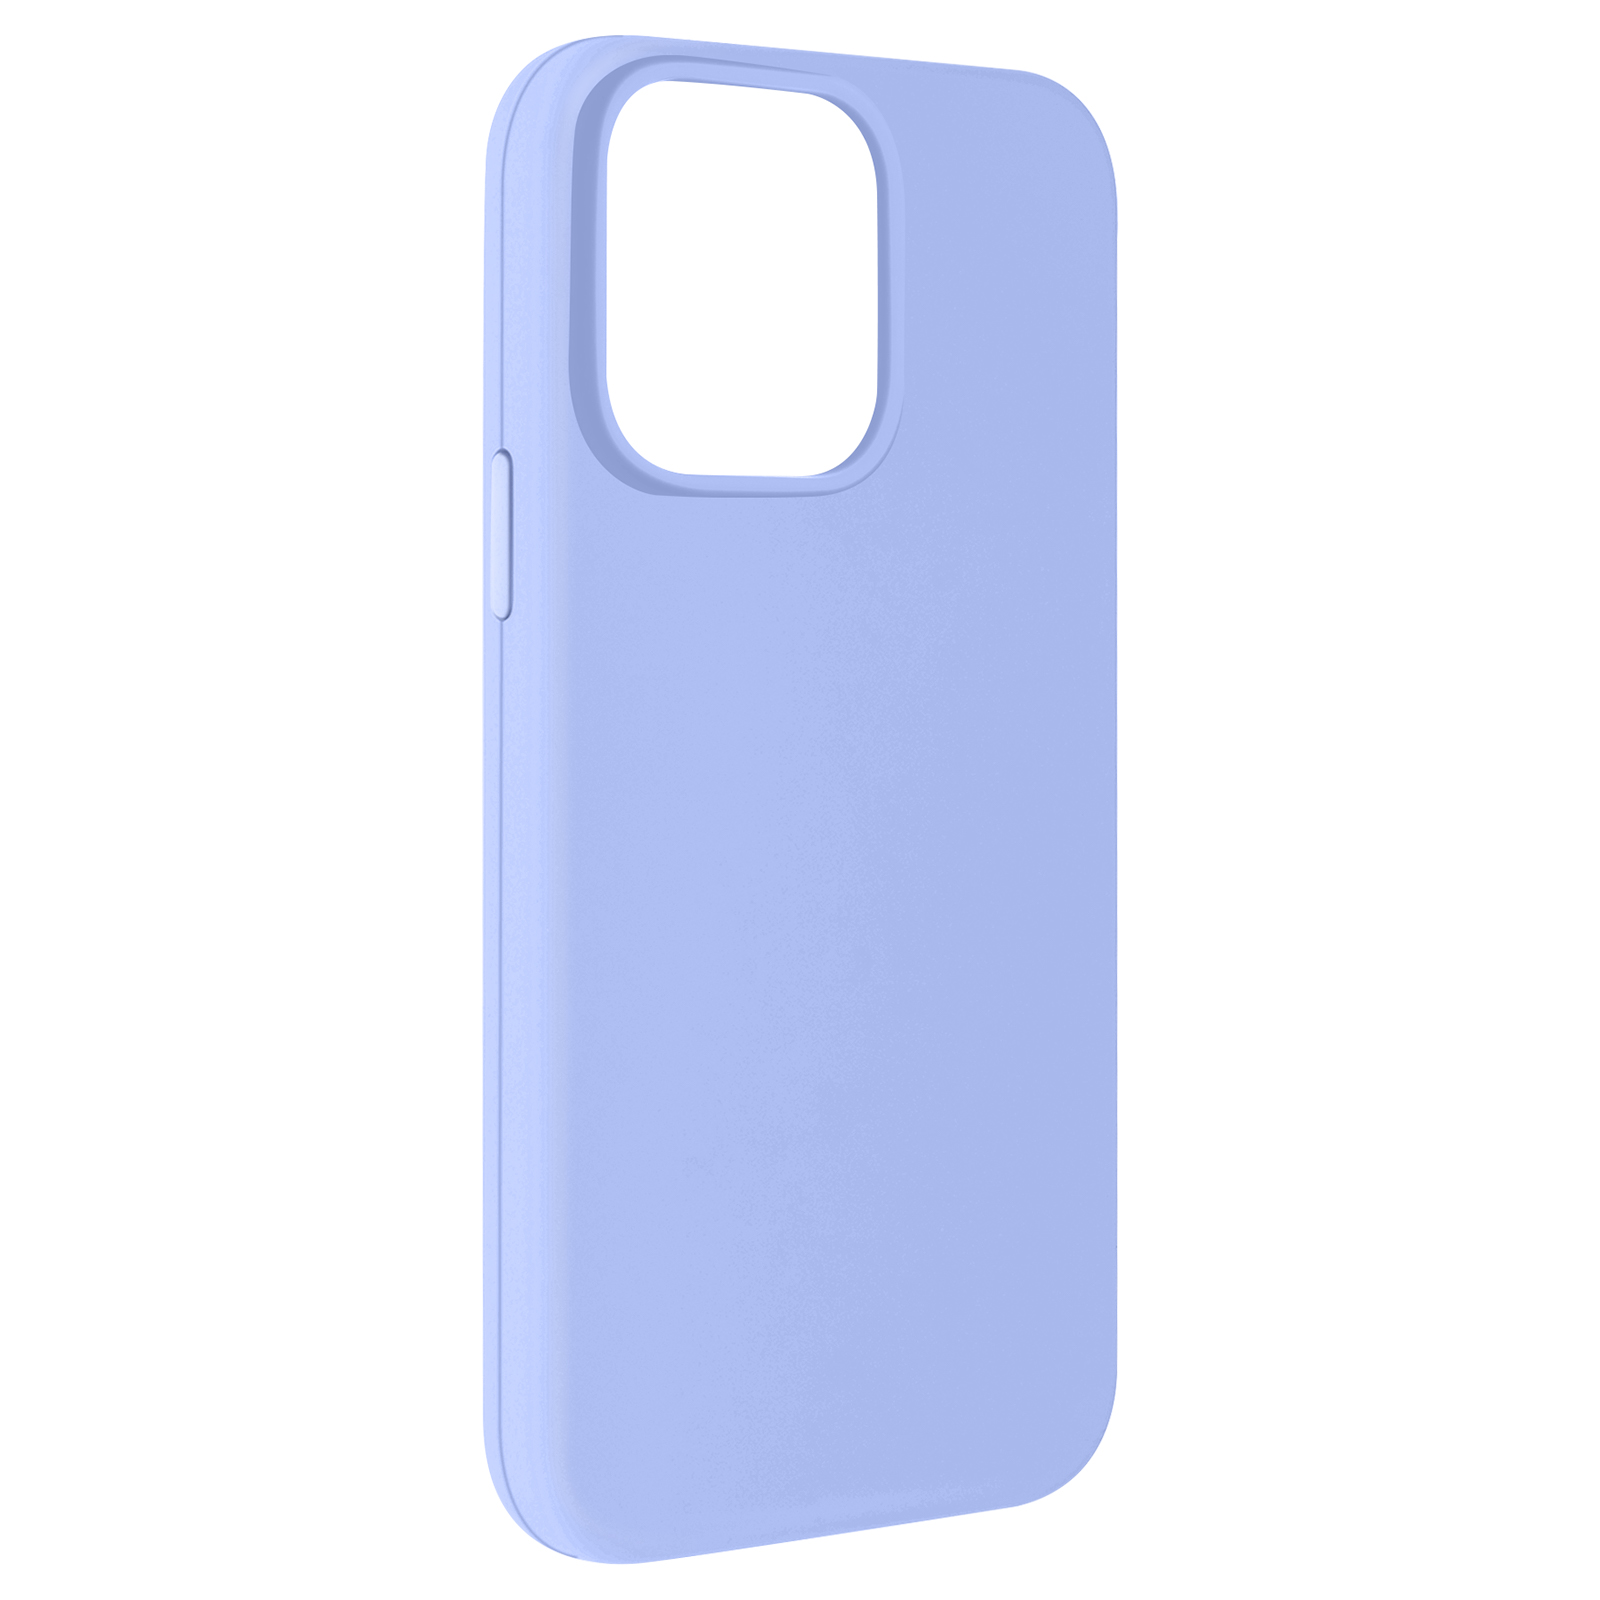 Backcover, Pro Touch Max, AVIZAR 15 iPhone Series, Soft Apple, Lila